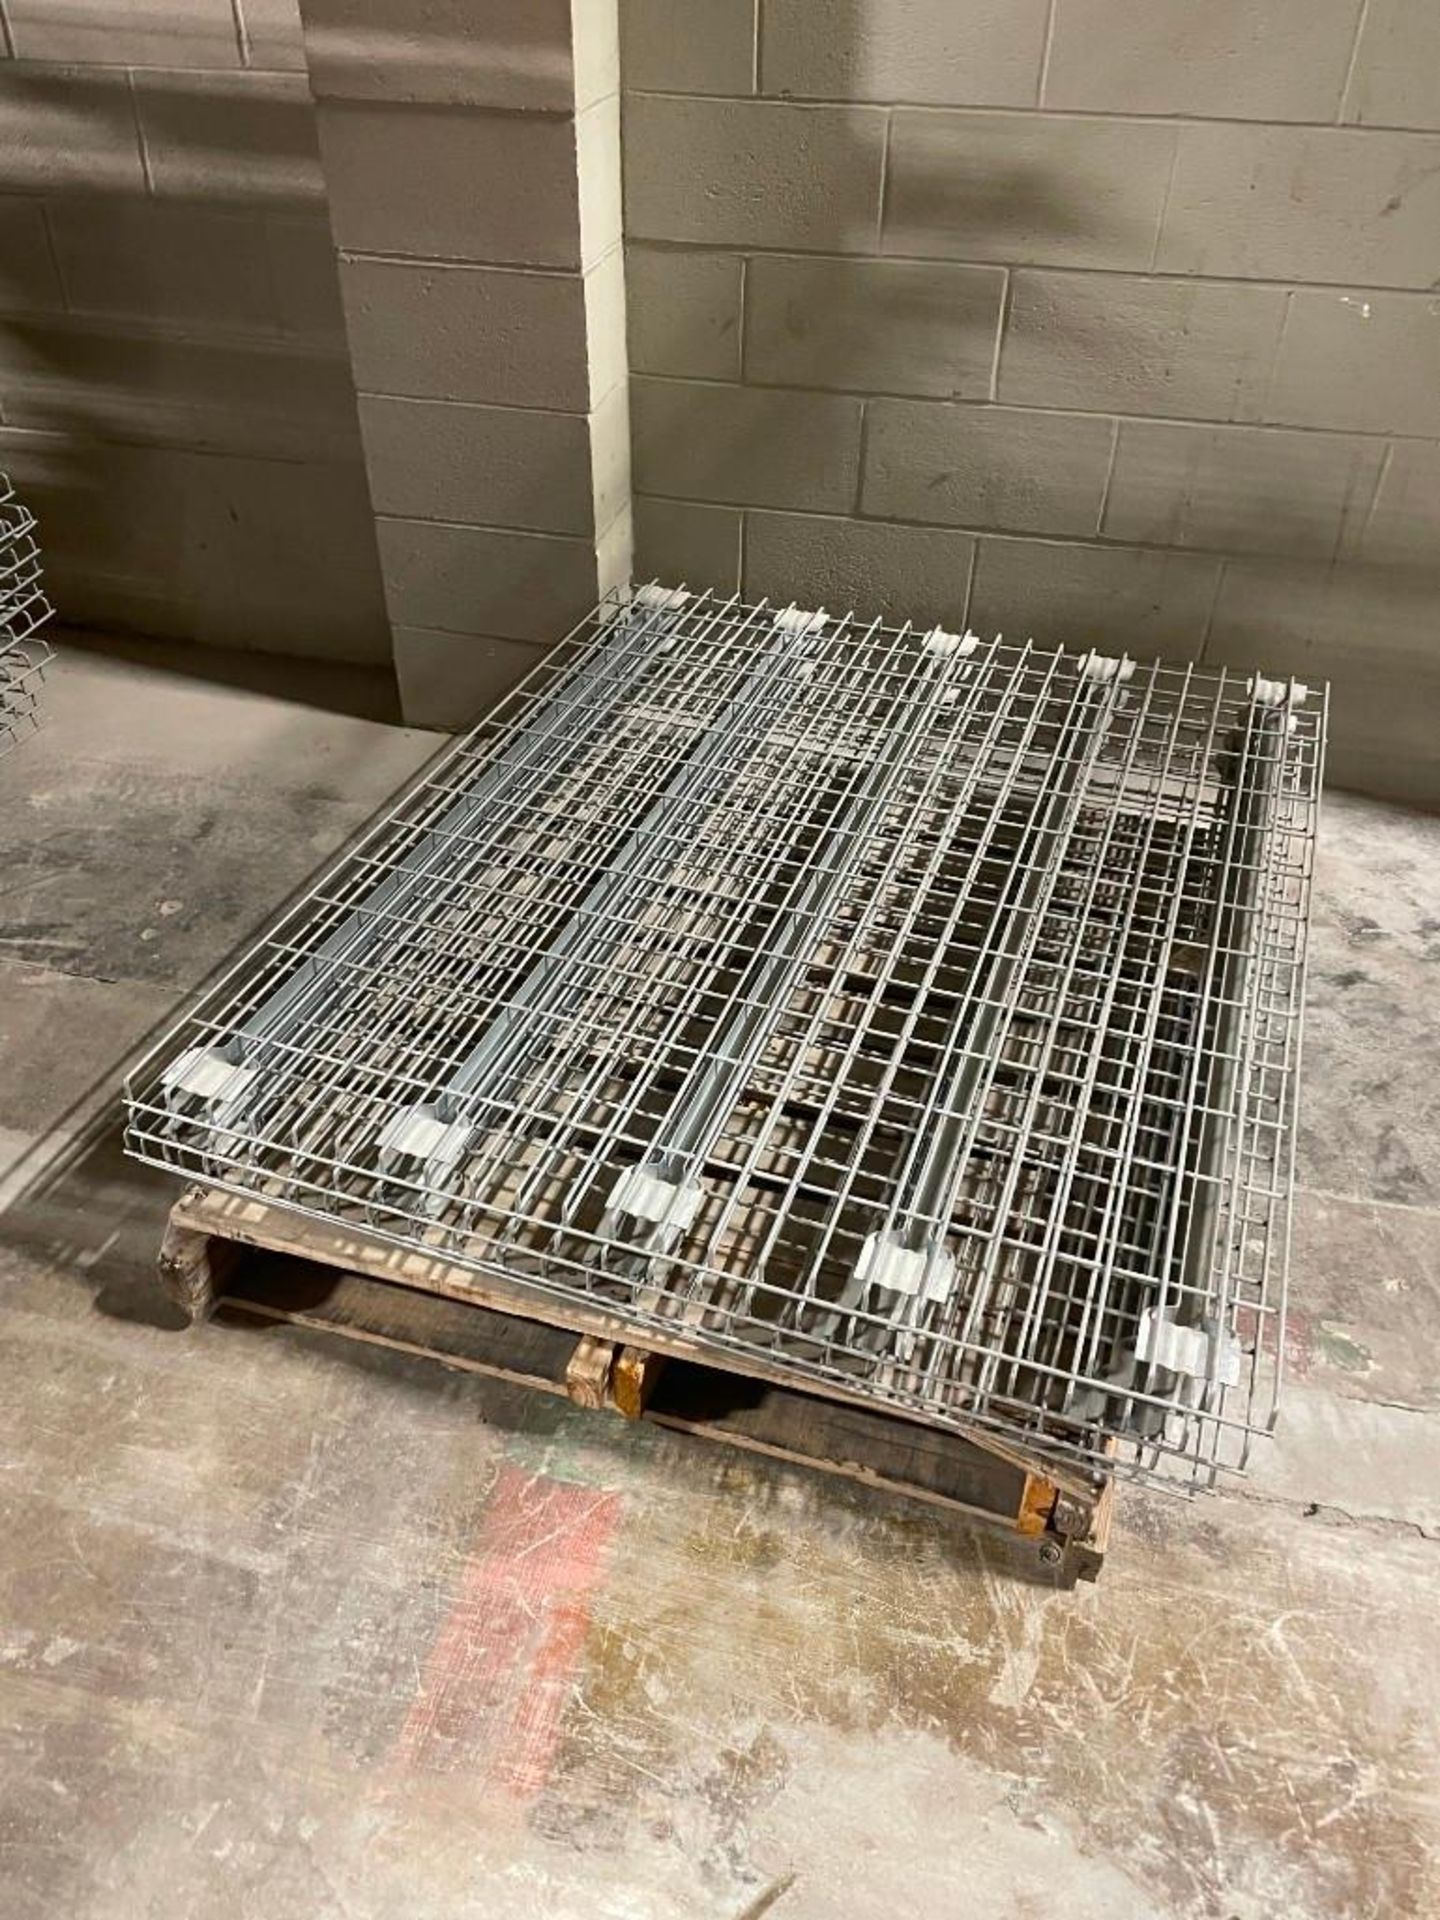 Lot of Pallet Racking, (44) Wire Baskets 55" x 46" - Image 3 of 3